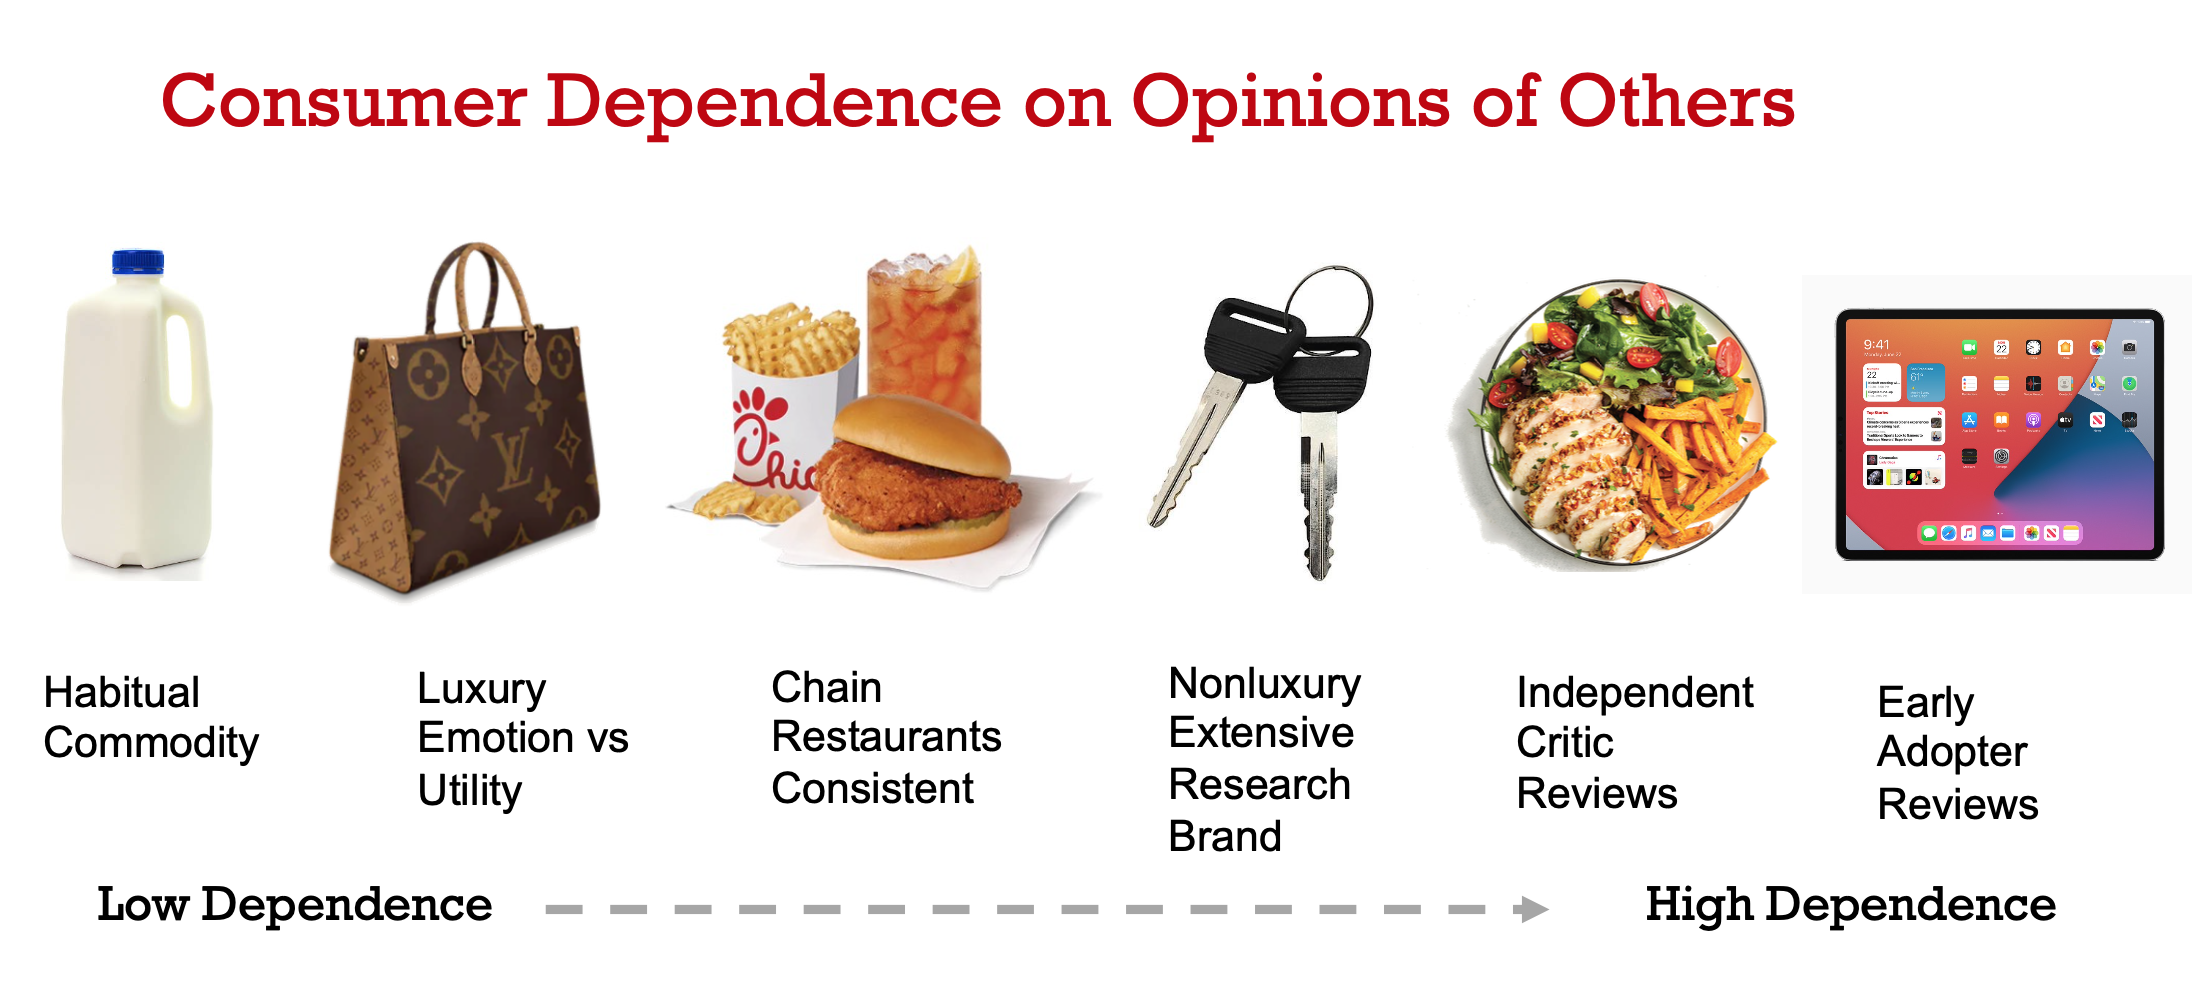 Consumer Dependence on Opinions of Others